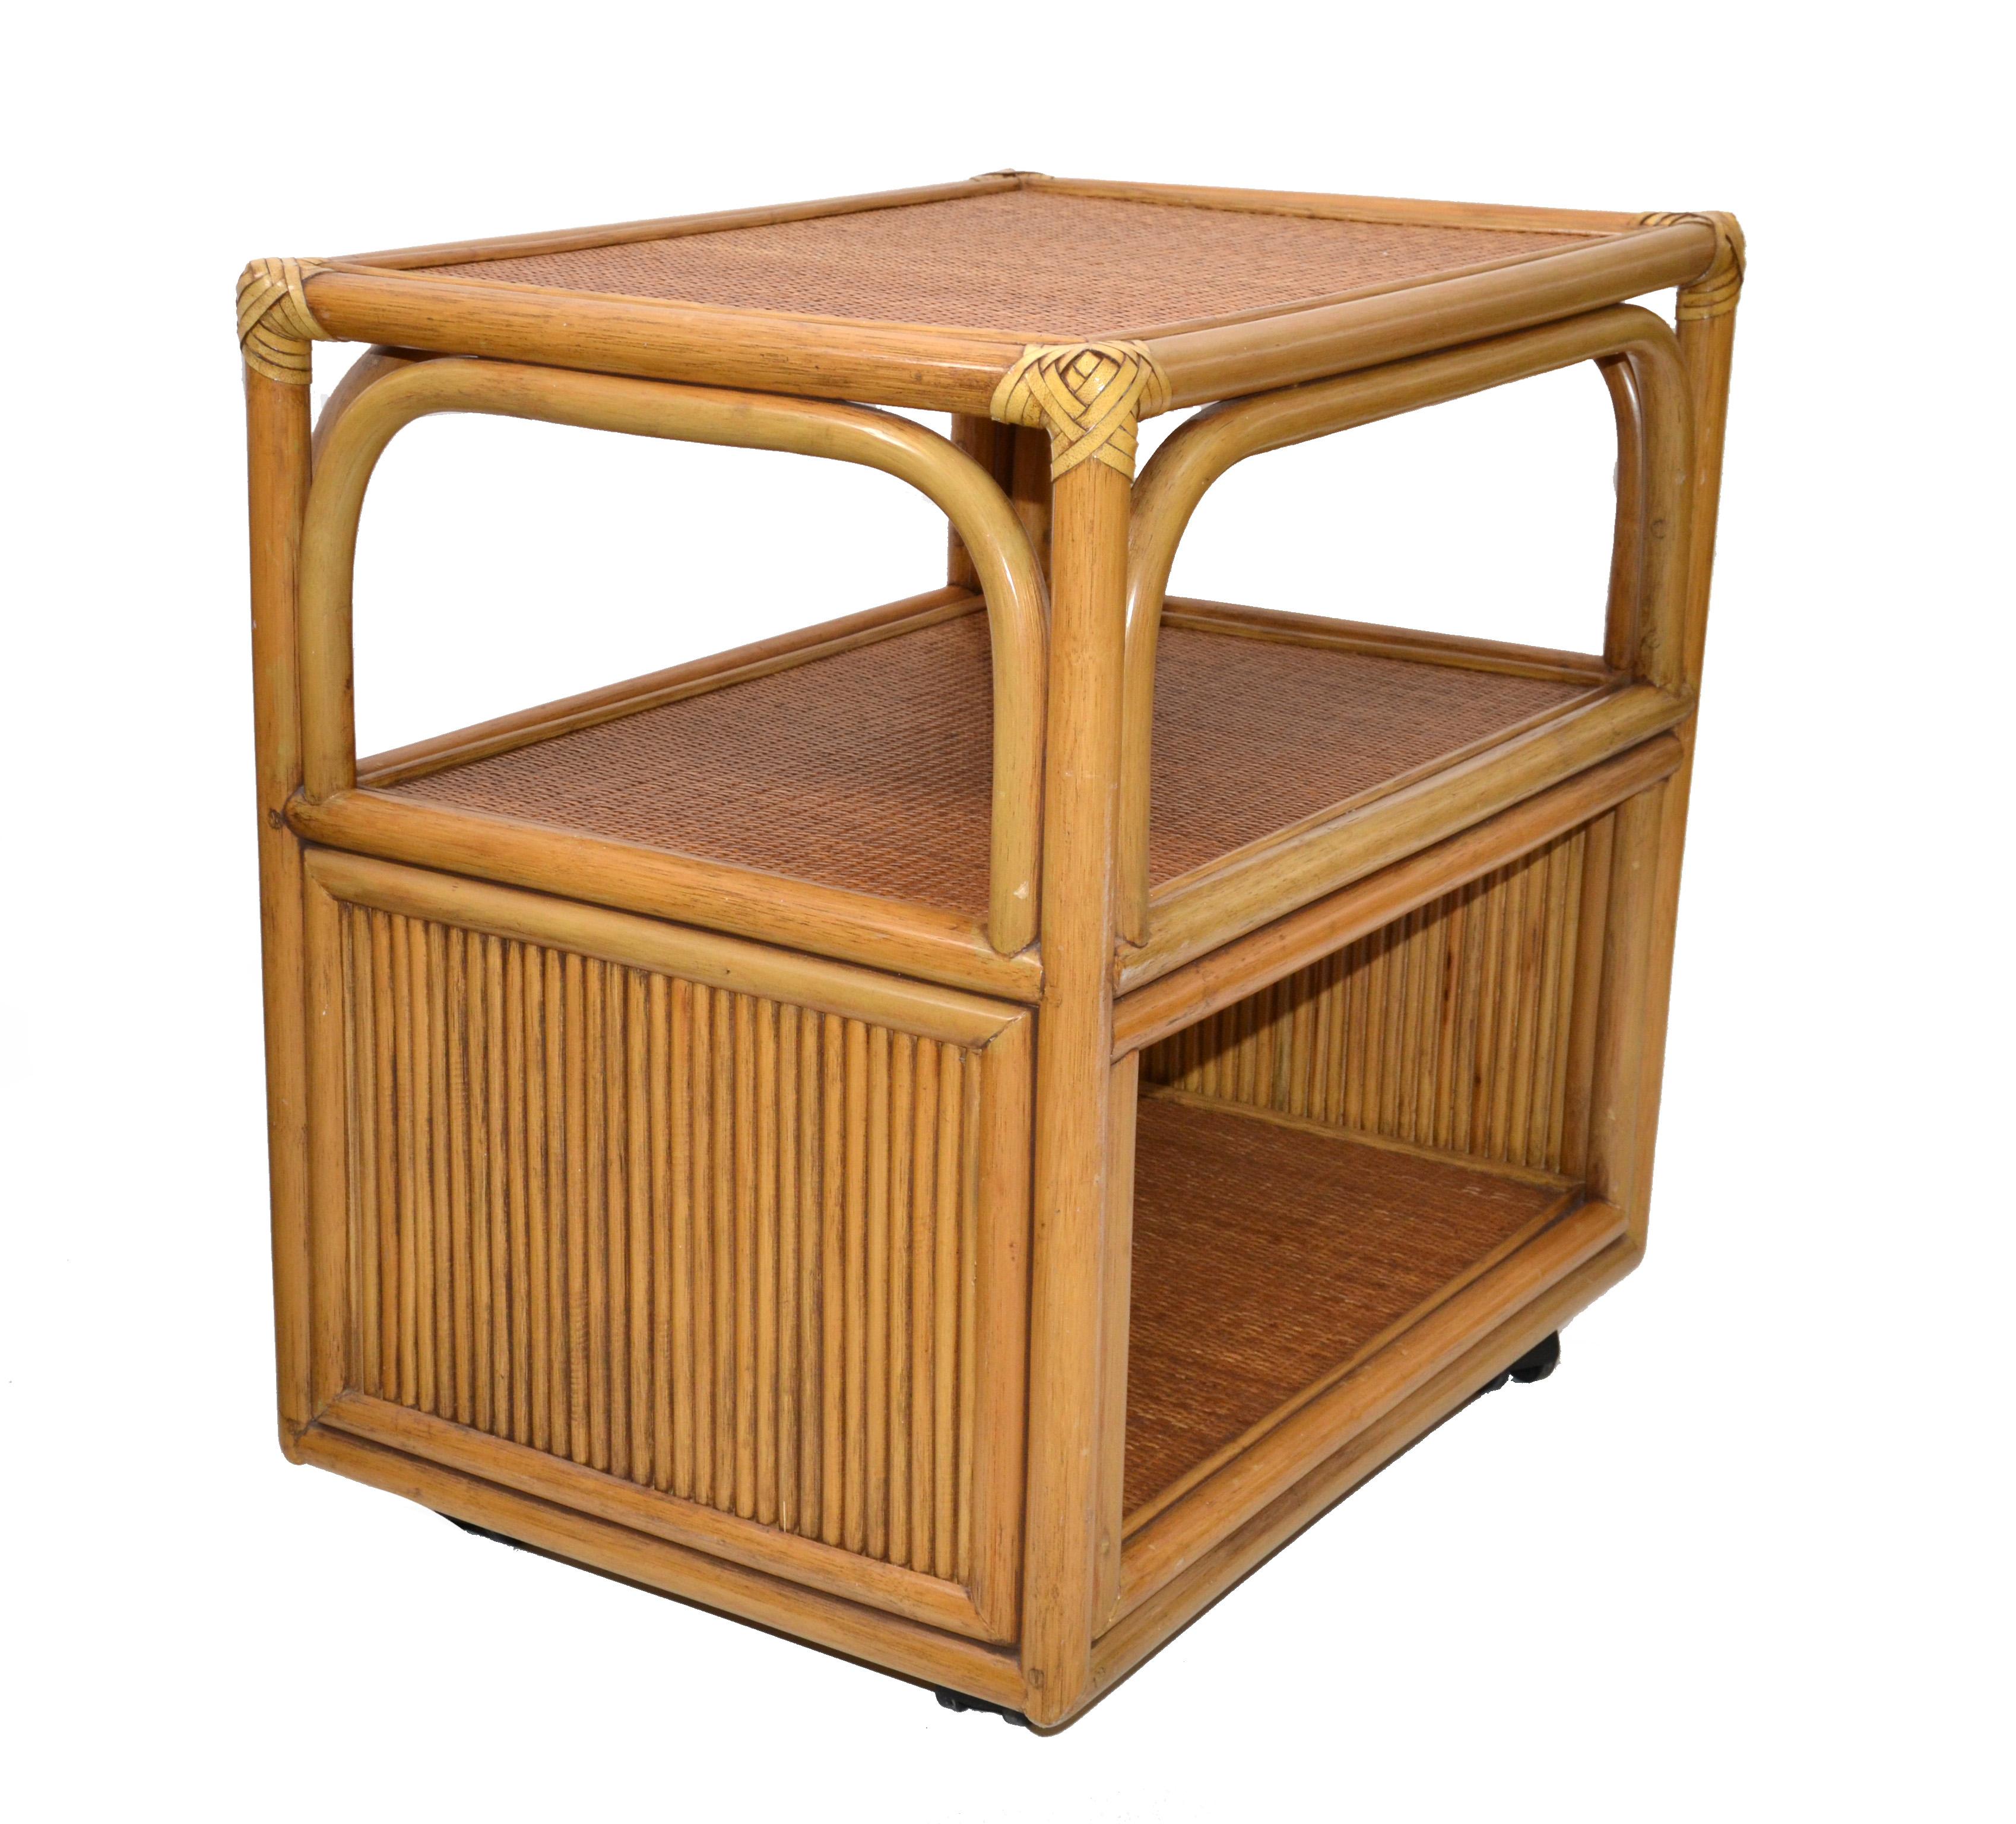 Vintage bamboo, cane and handwoven Serving Cart, side table, end table, bedside table, kitchen cart with leather bindings to the corners.
The 4 casters run smoothly.
Bohemian Chic for Tropical Home Settings. 
 